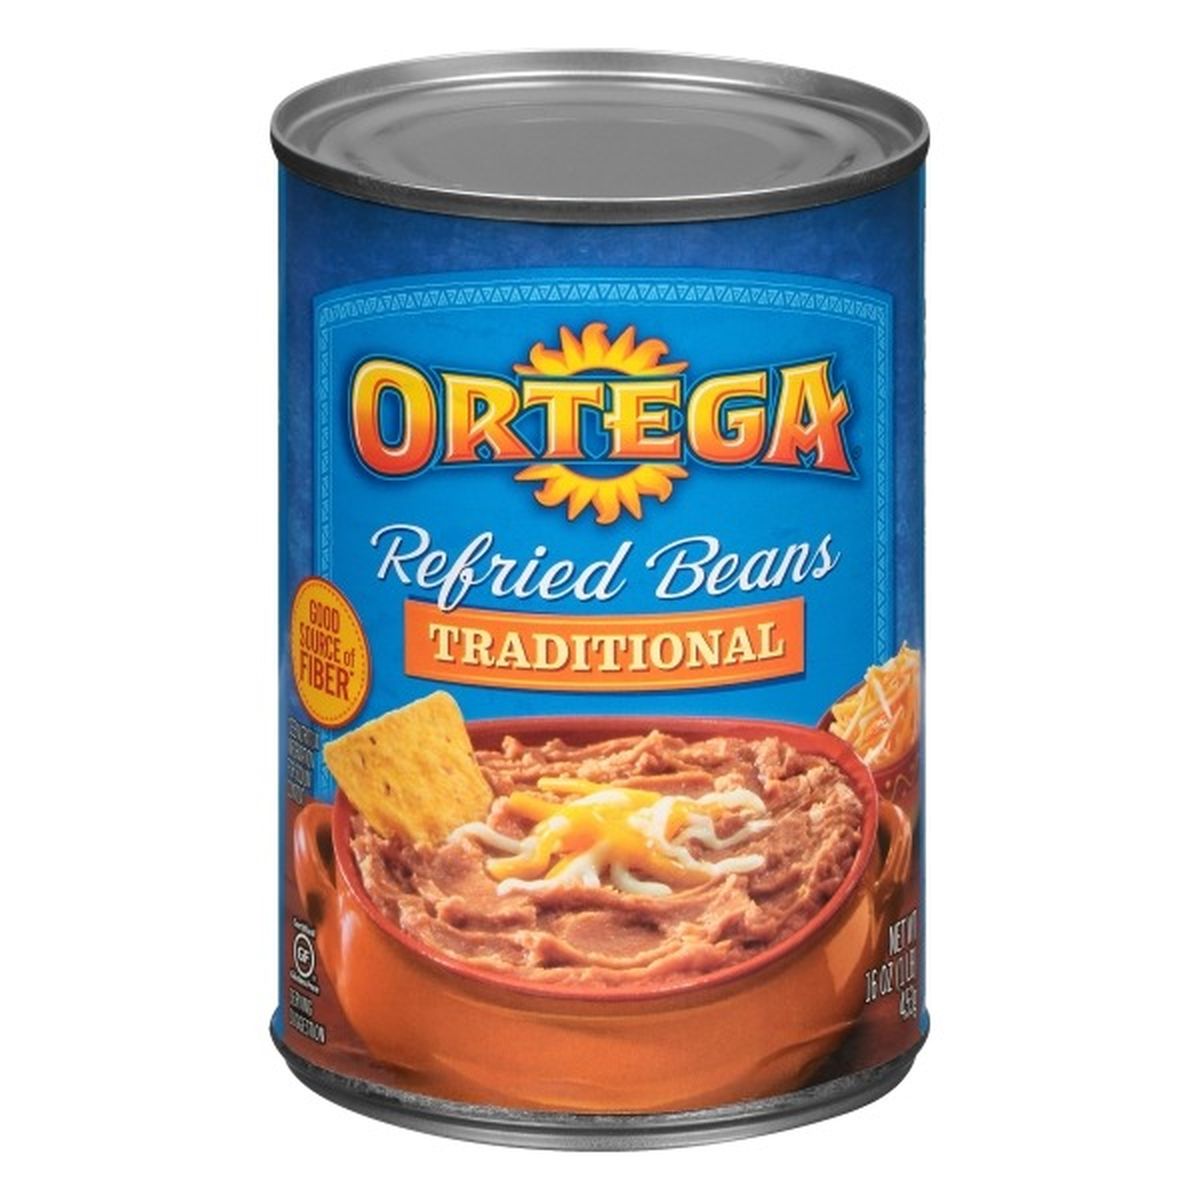 Calories in Ortega Refried Beans, Traditional